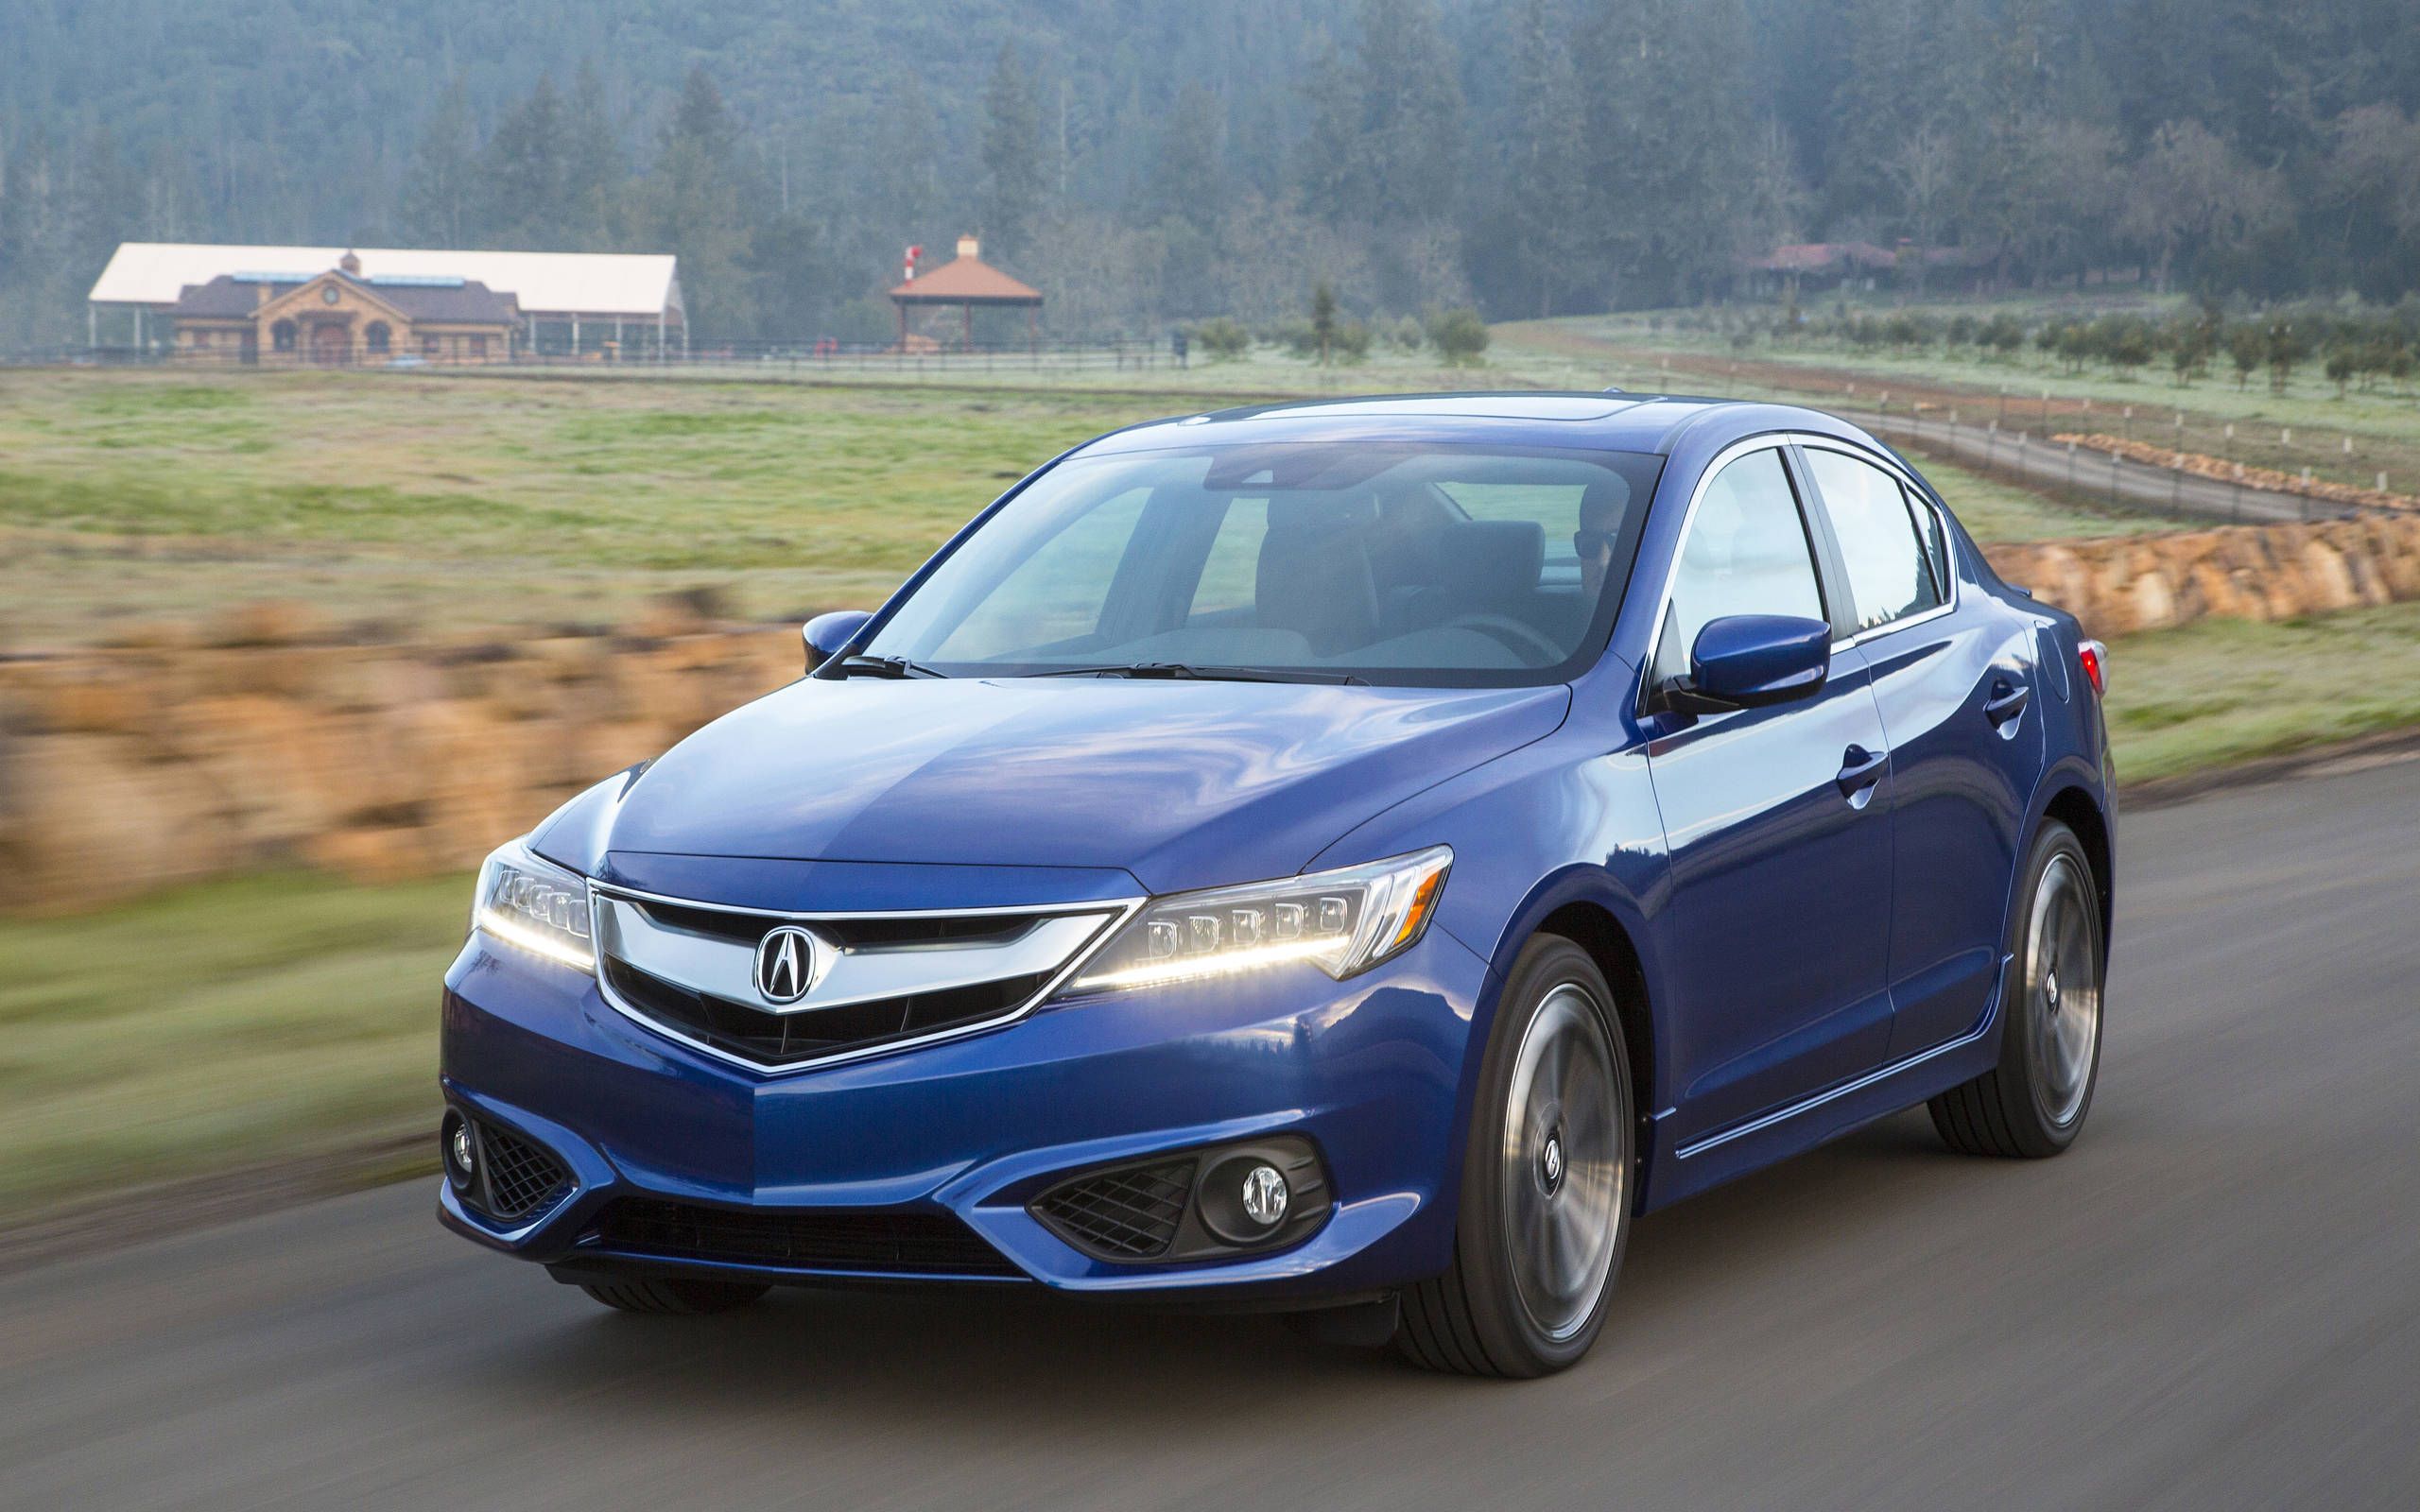 2016 Acura ILX review notes: A Civic-minded Acura